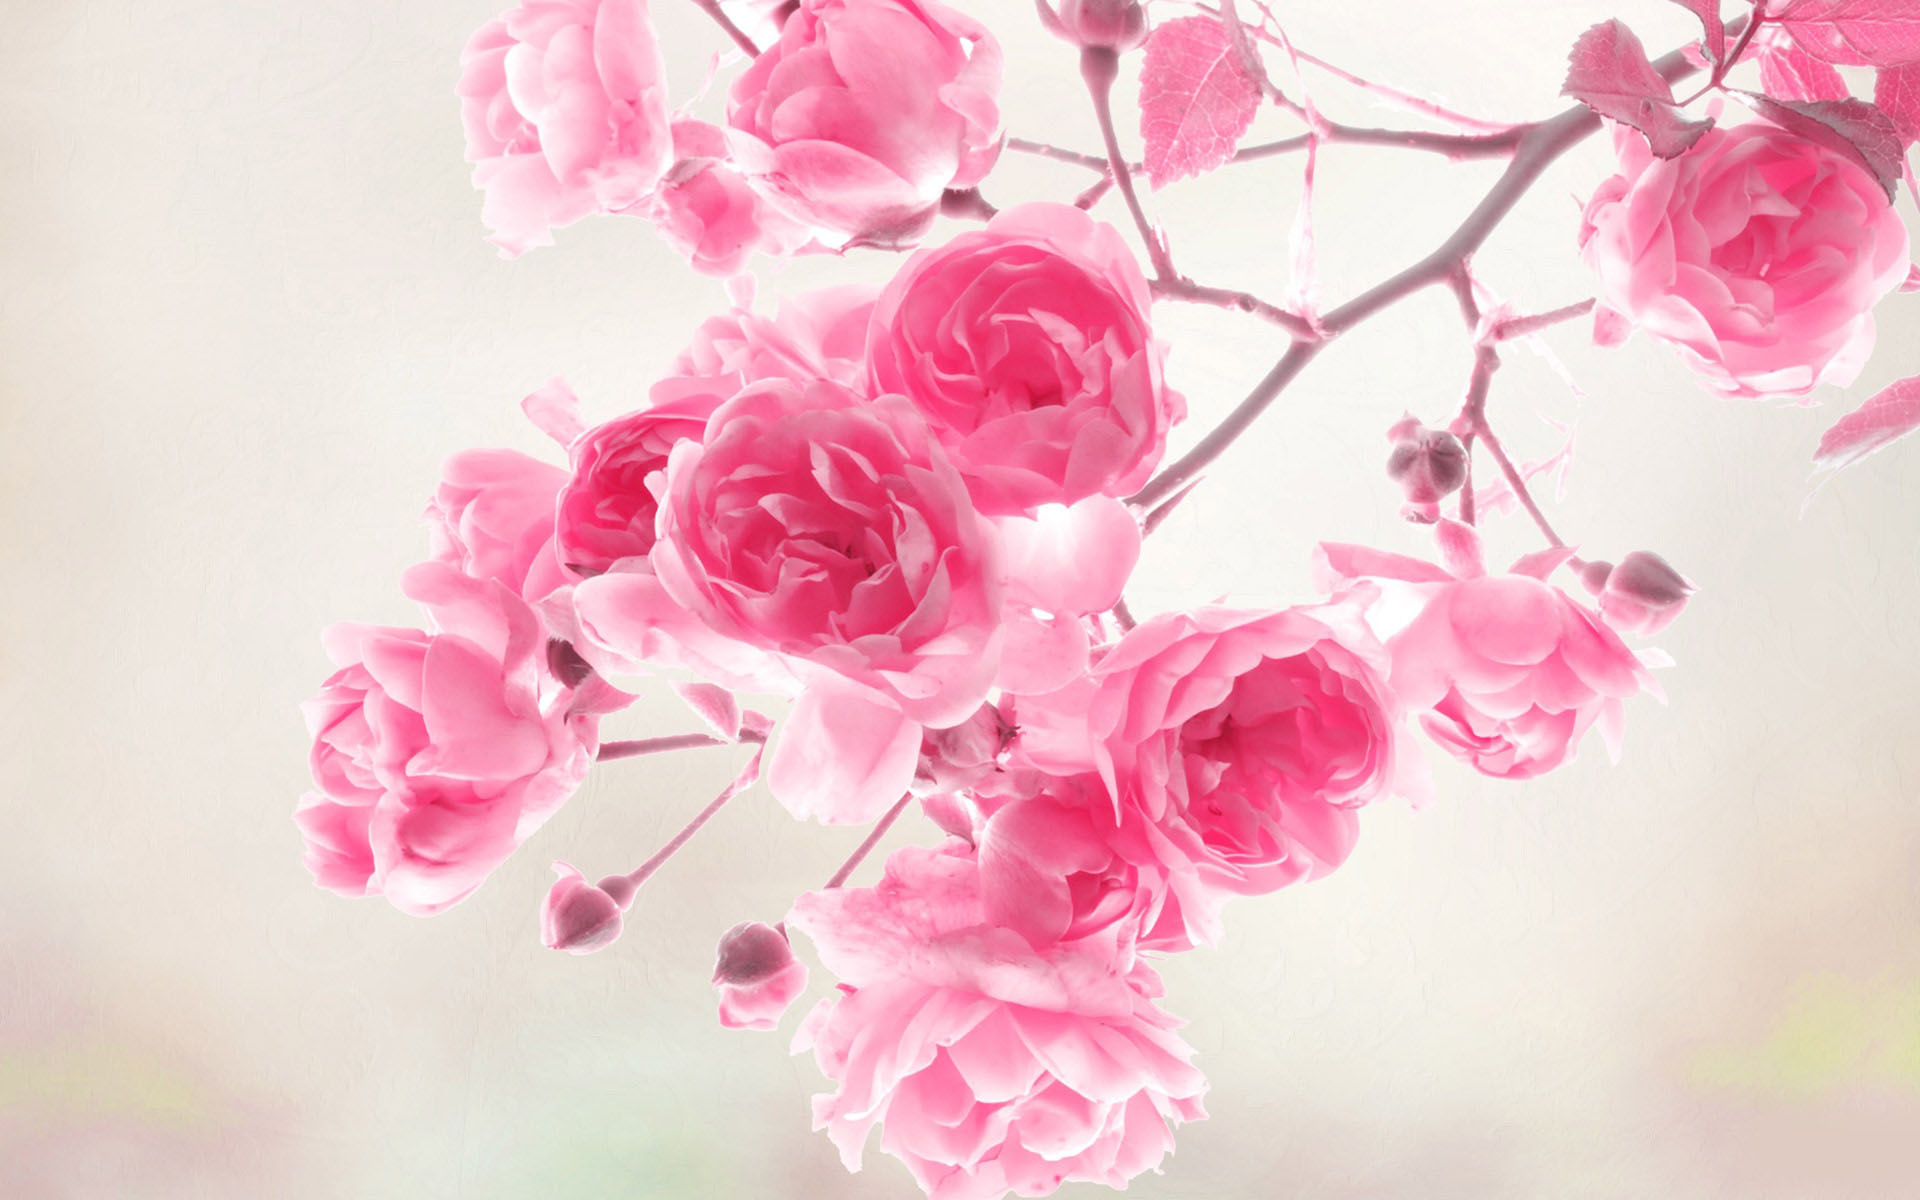 Cute Pink Wallpapers | Wallpapers, Backgrounds, Images, Art Photos.